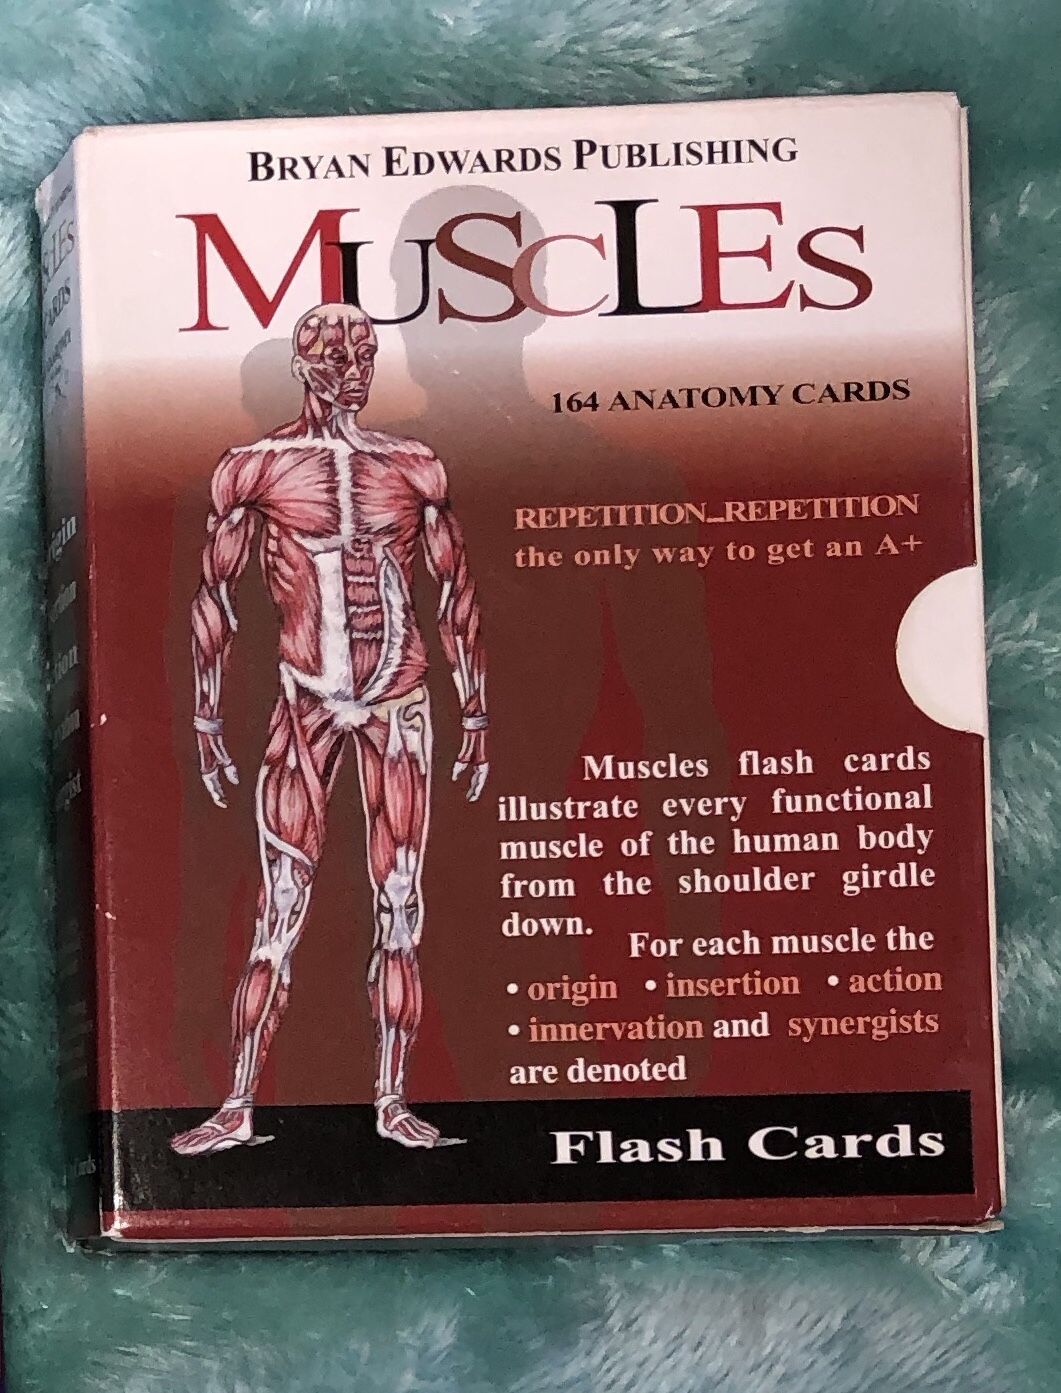 Physical Therapy Reference Books & Flashcards